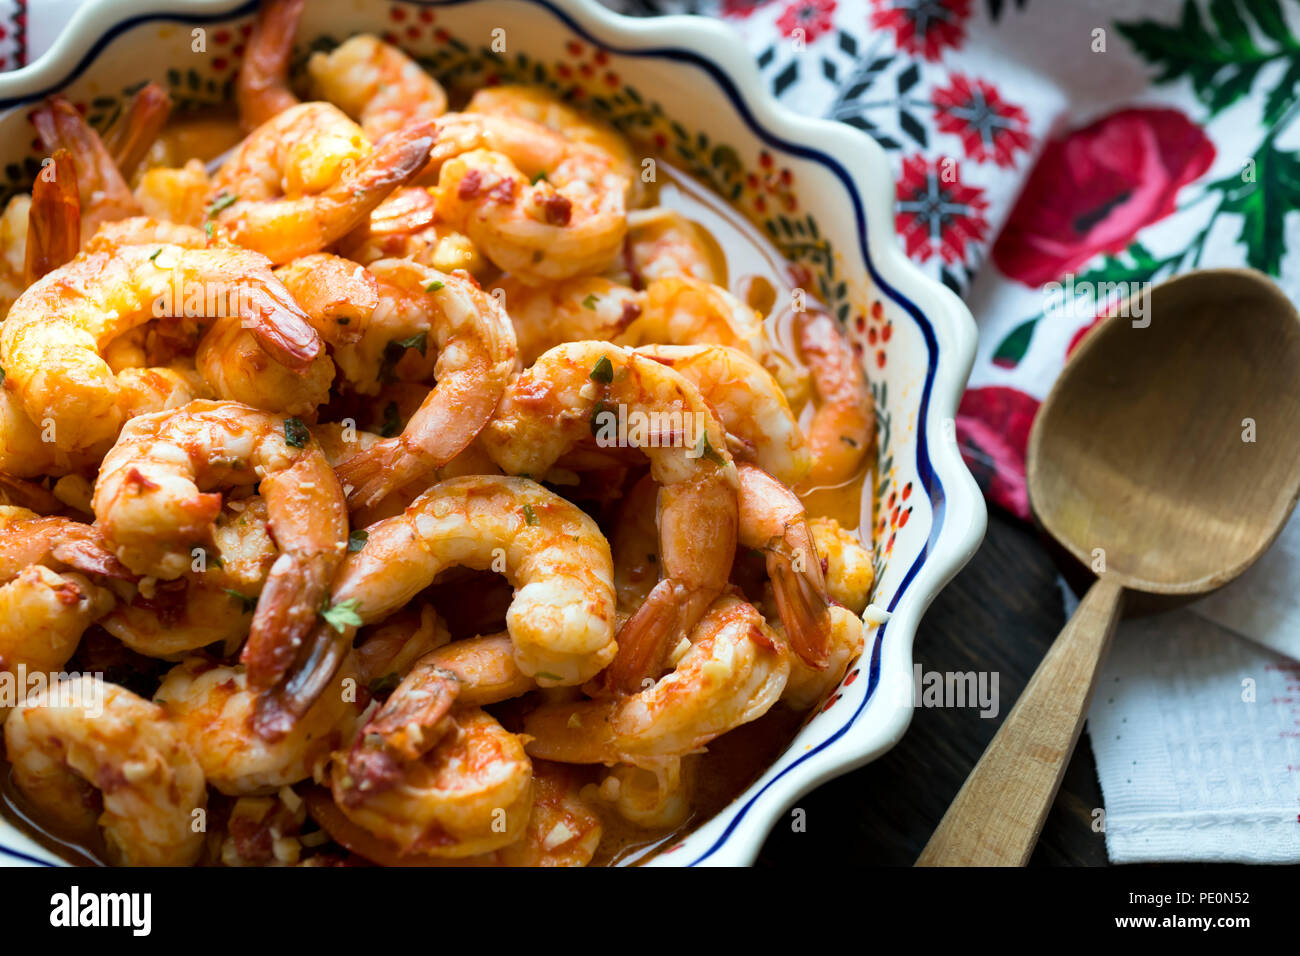 Spicy appetizing seafood Shrimps cooked and baked in sauce are displayed on a wooden table in a dish with ornament located next to a towel with colorf Stock Photo